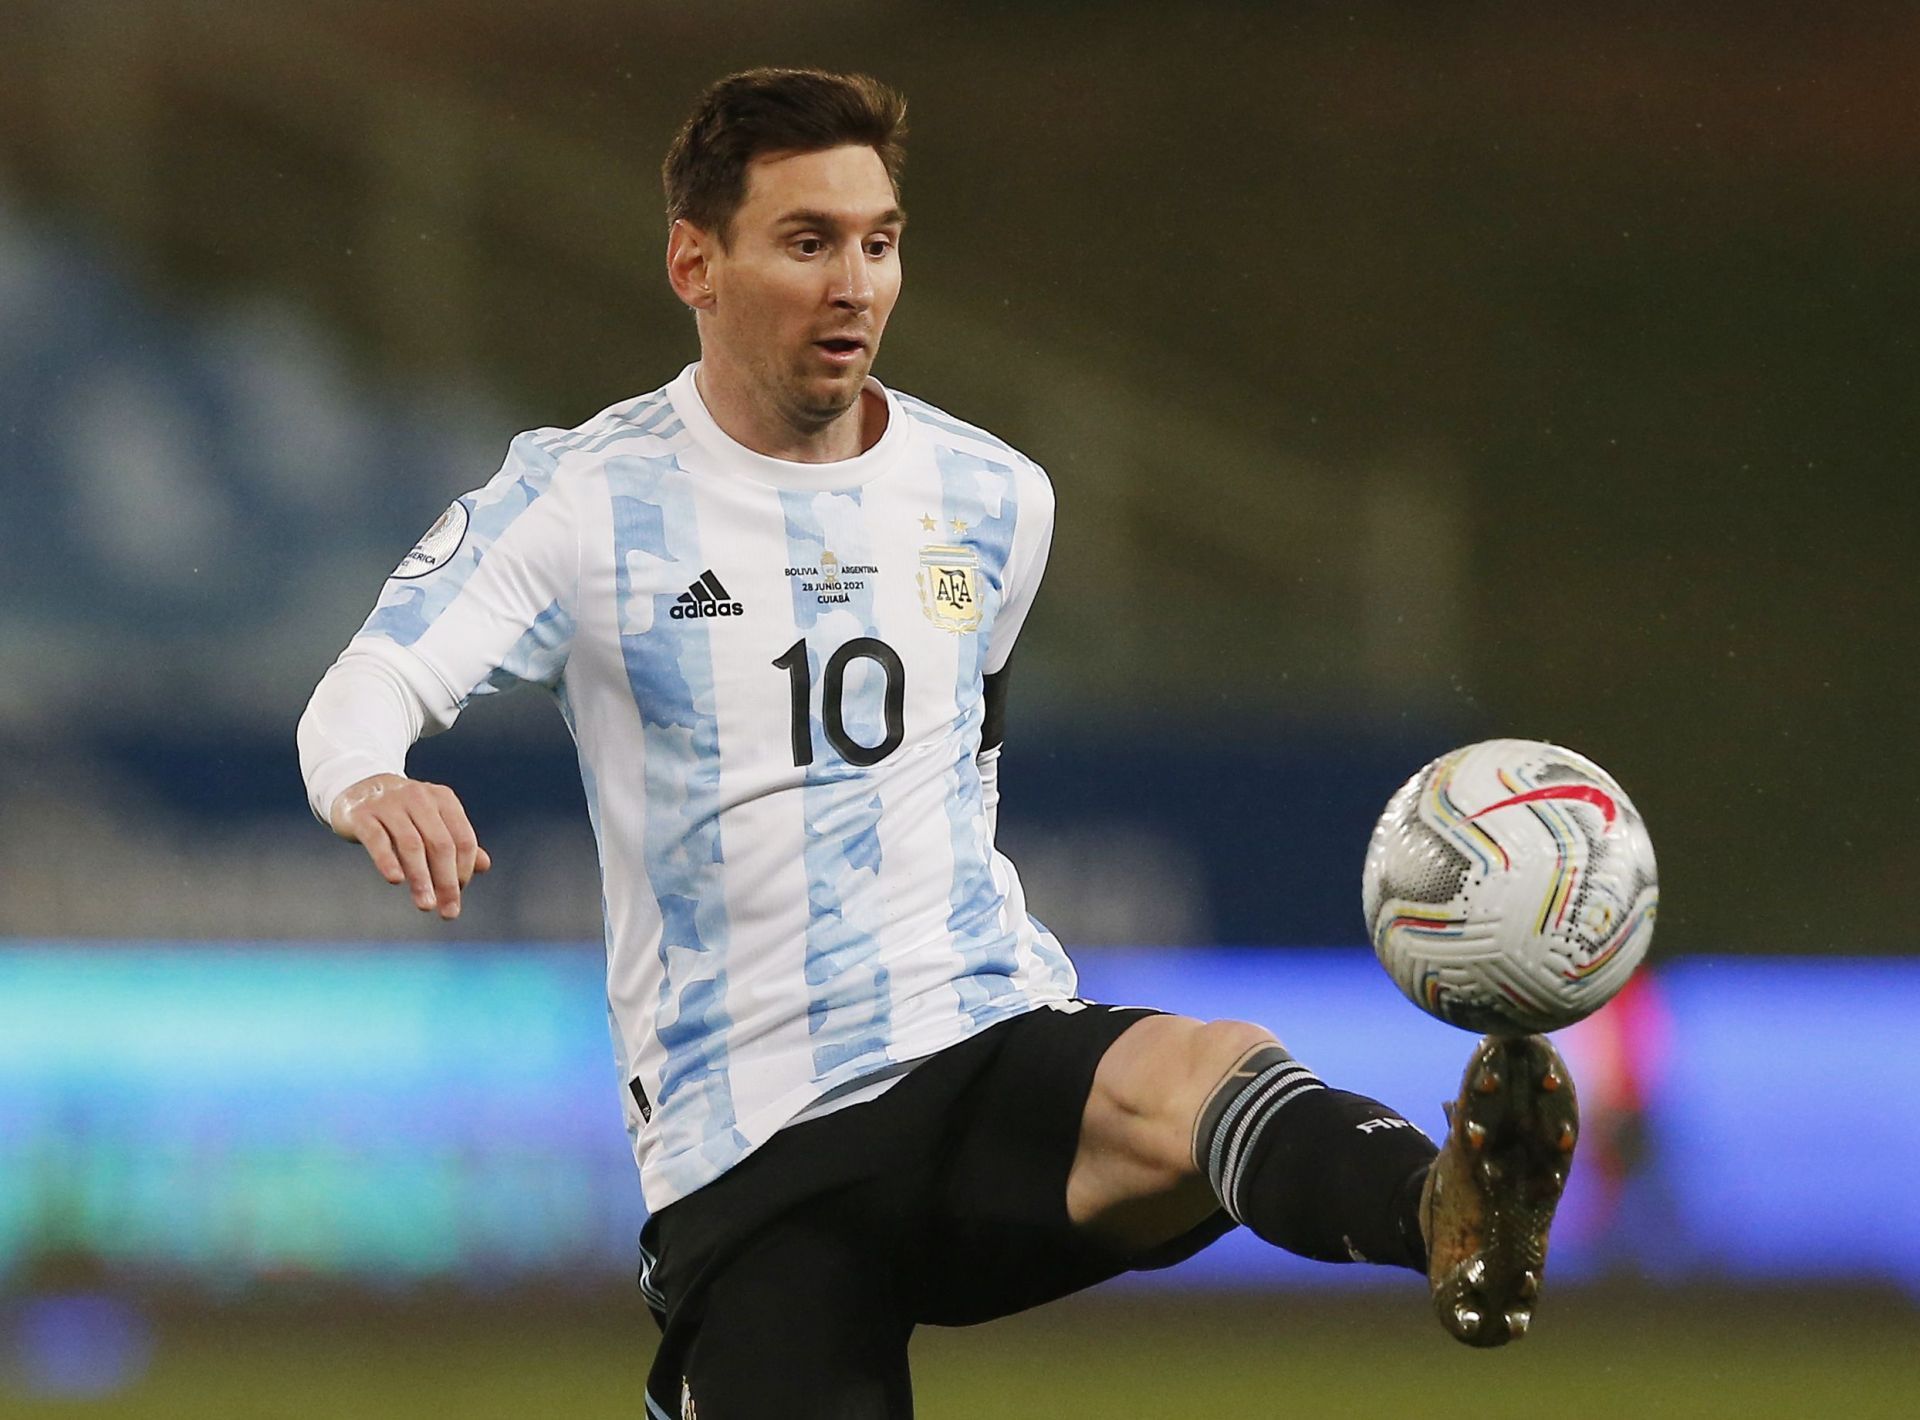 Messi scored a goal in the final home game in the qualifying campaign